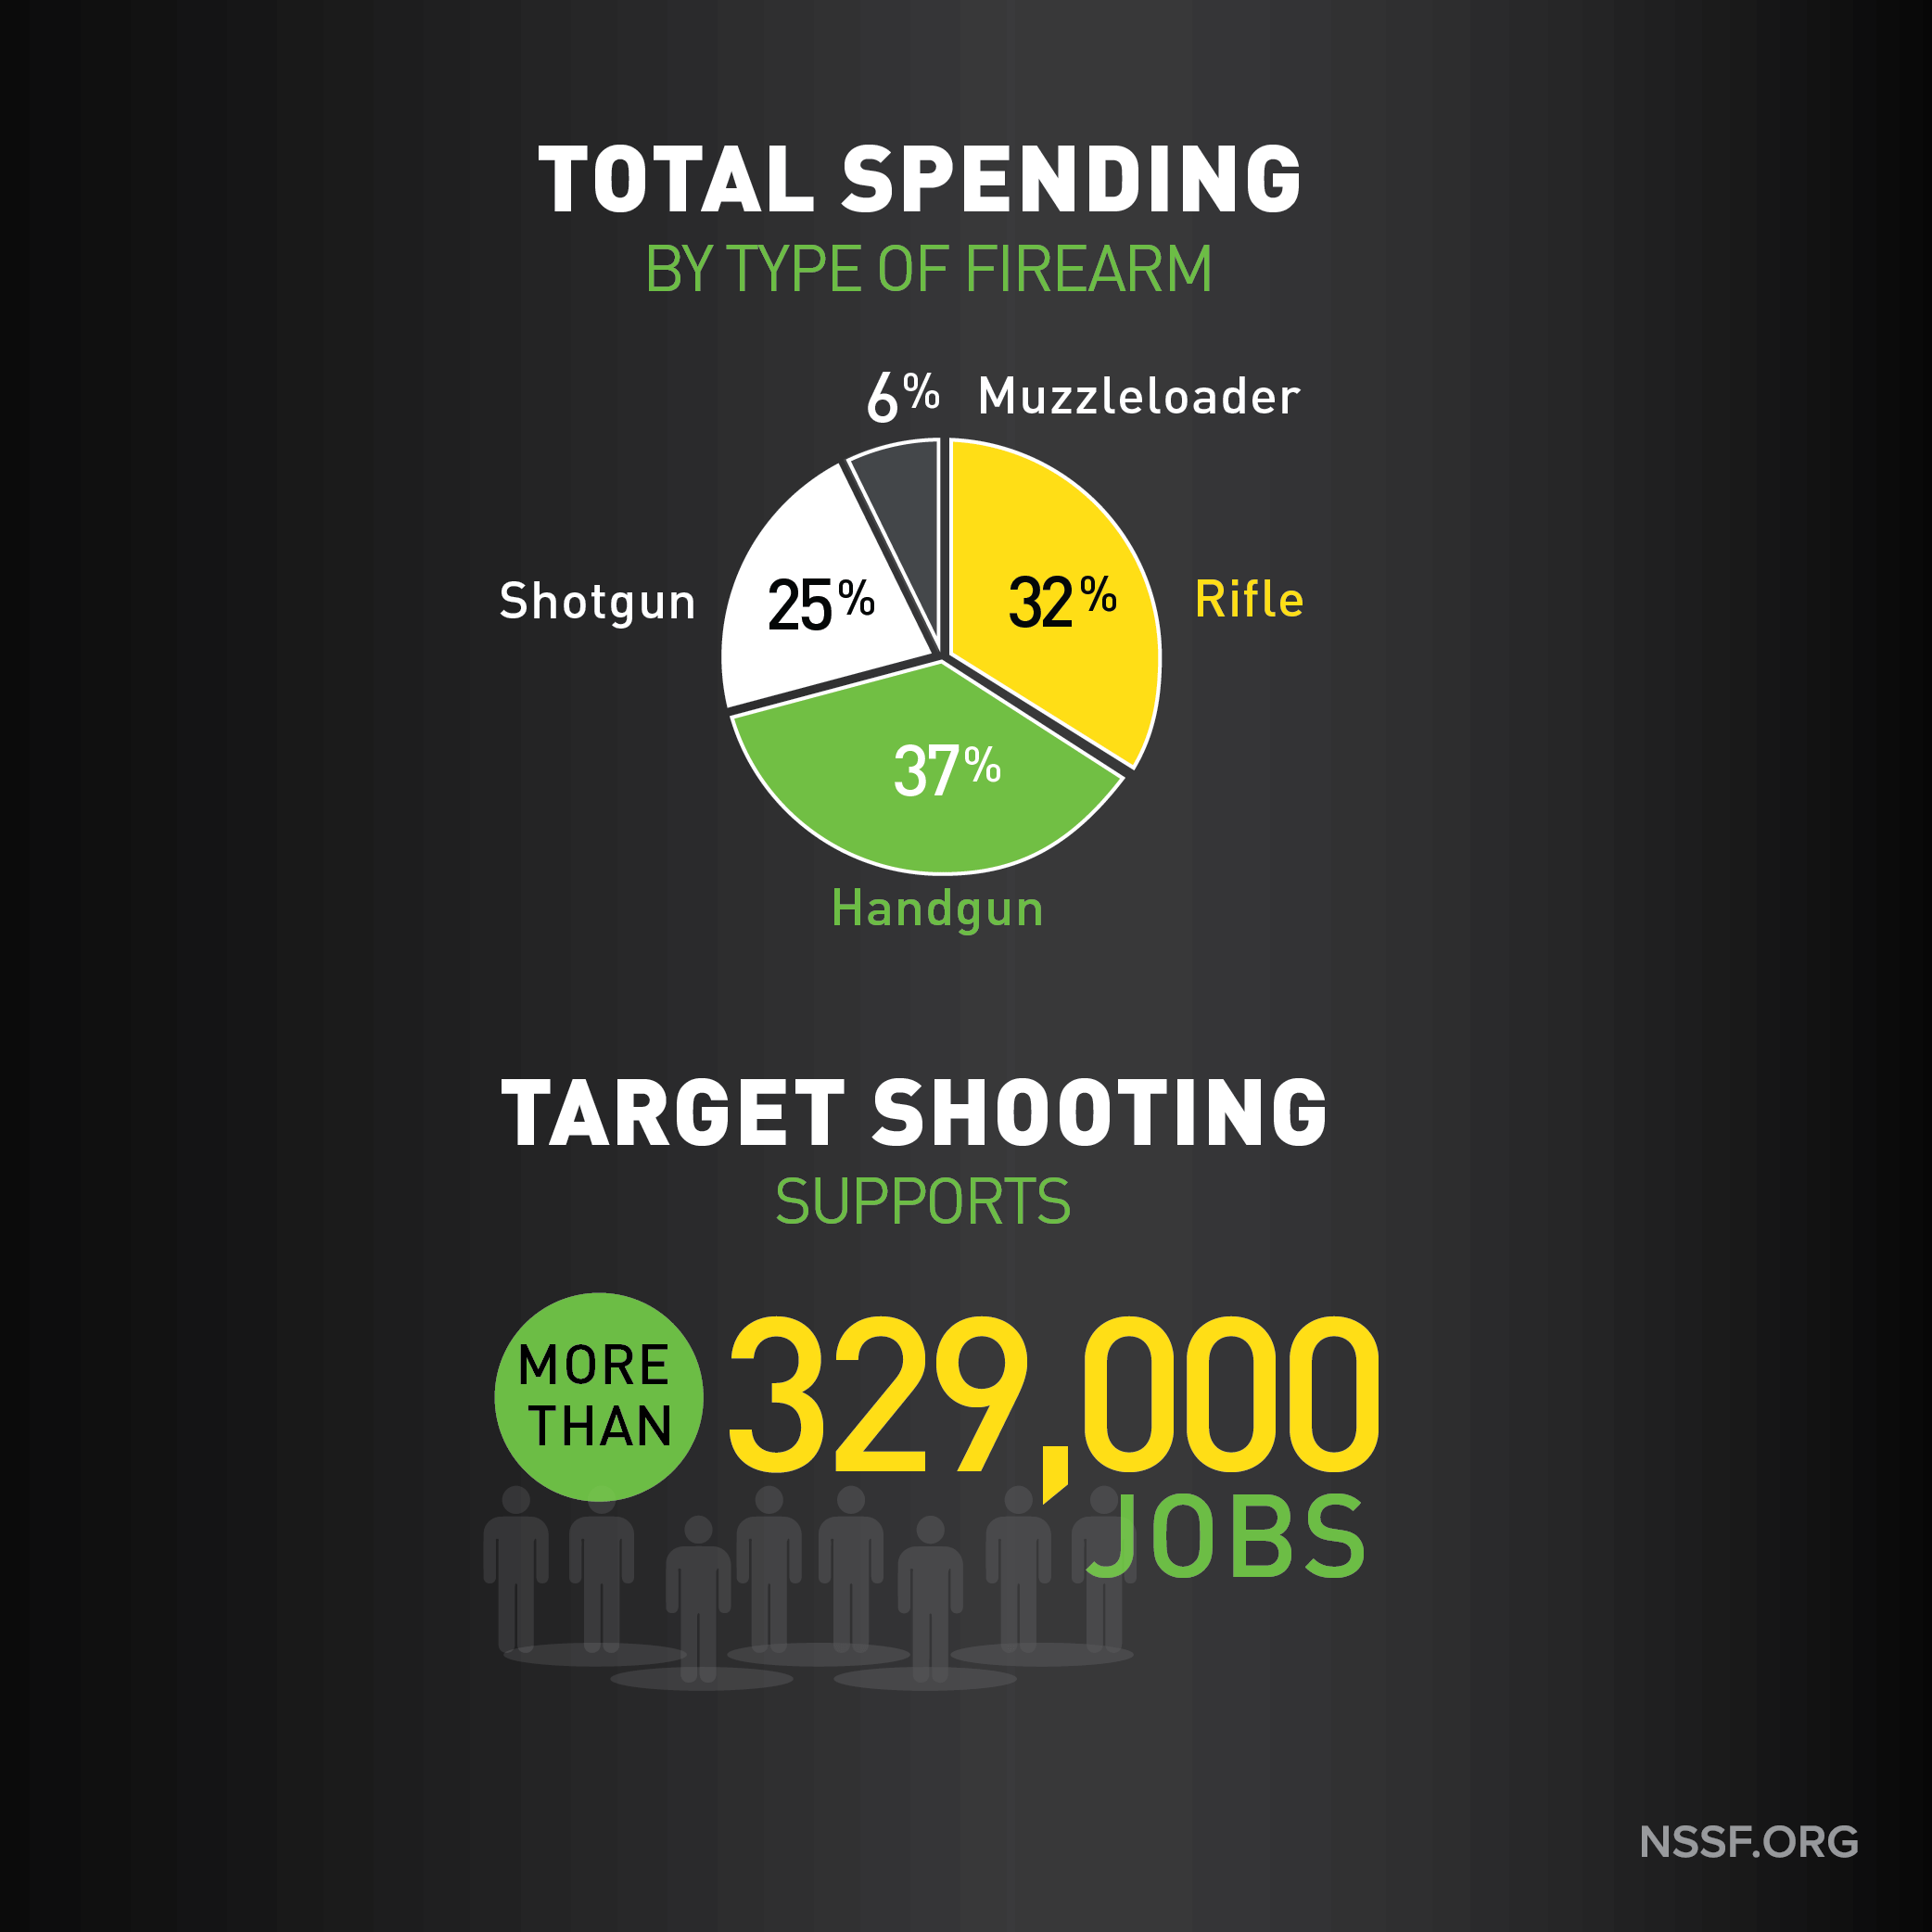 Target+shooting+supports+more+than+329,000+jobs.